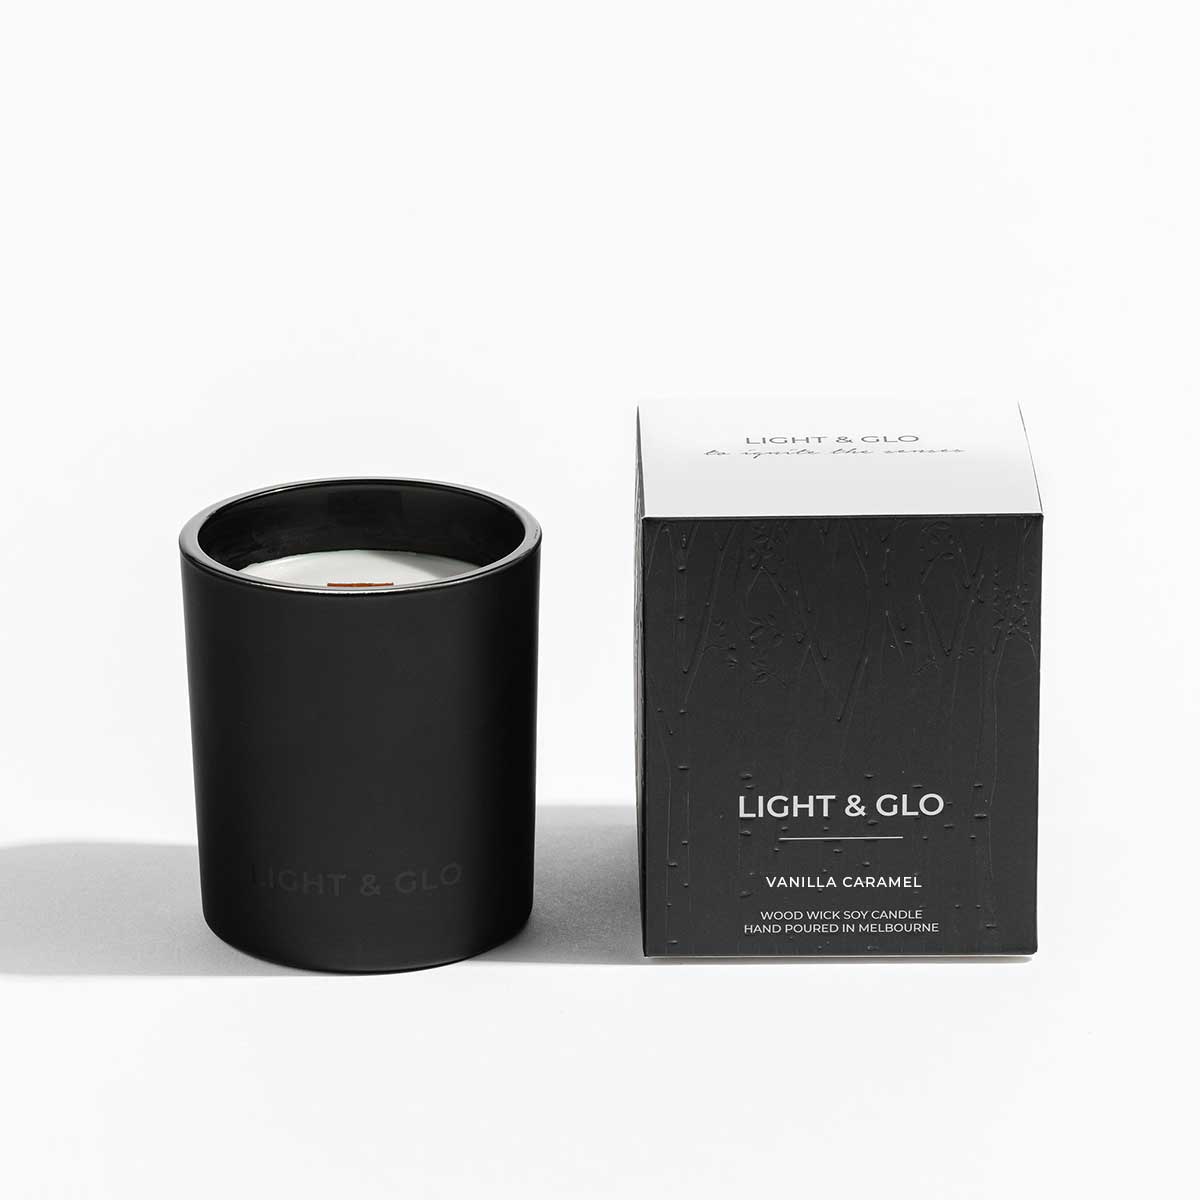 Vanilla Caramel - Monochrome Large 300g Candle | Luxury Candles & Home Fragrances by Light + Glo